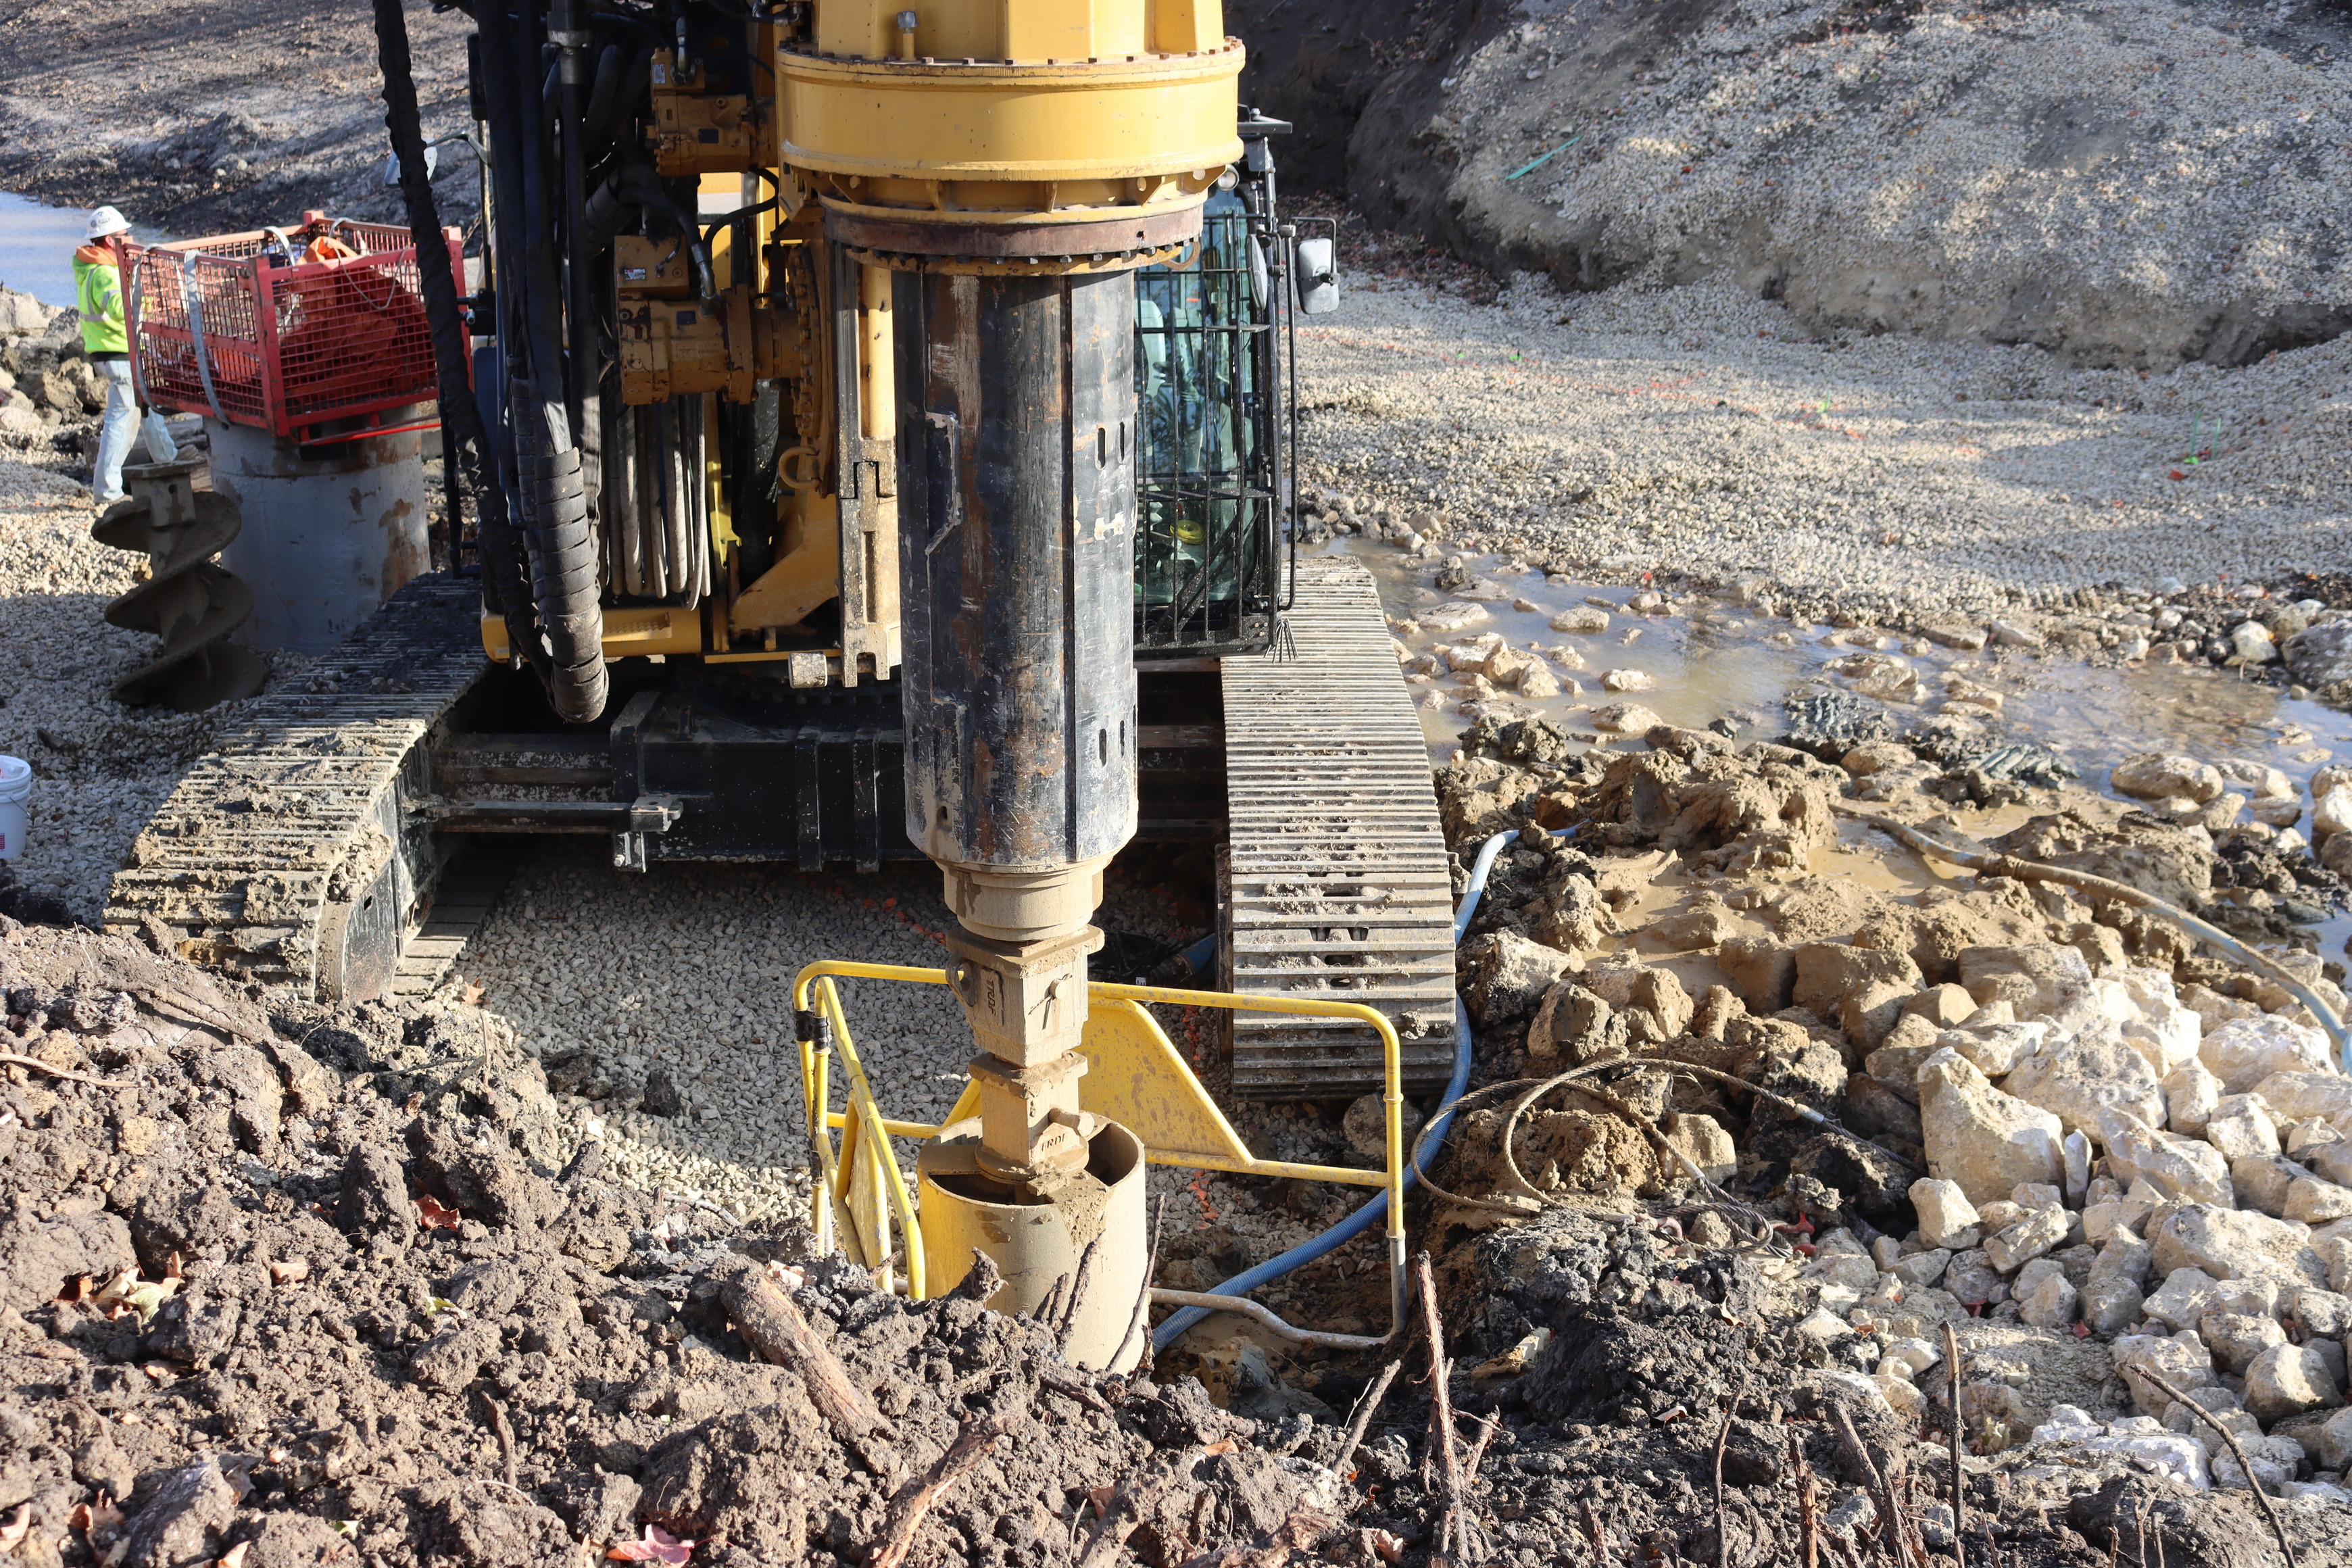 Large yellow construction equipment with drill attachment in center of image bores holes to be filled with concrete to support bridge.